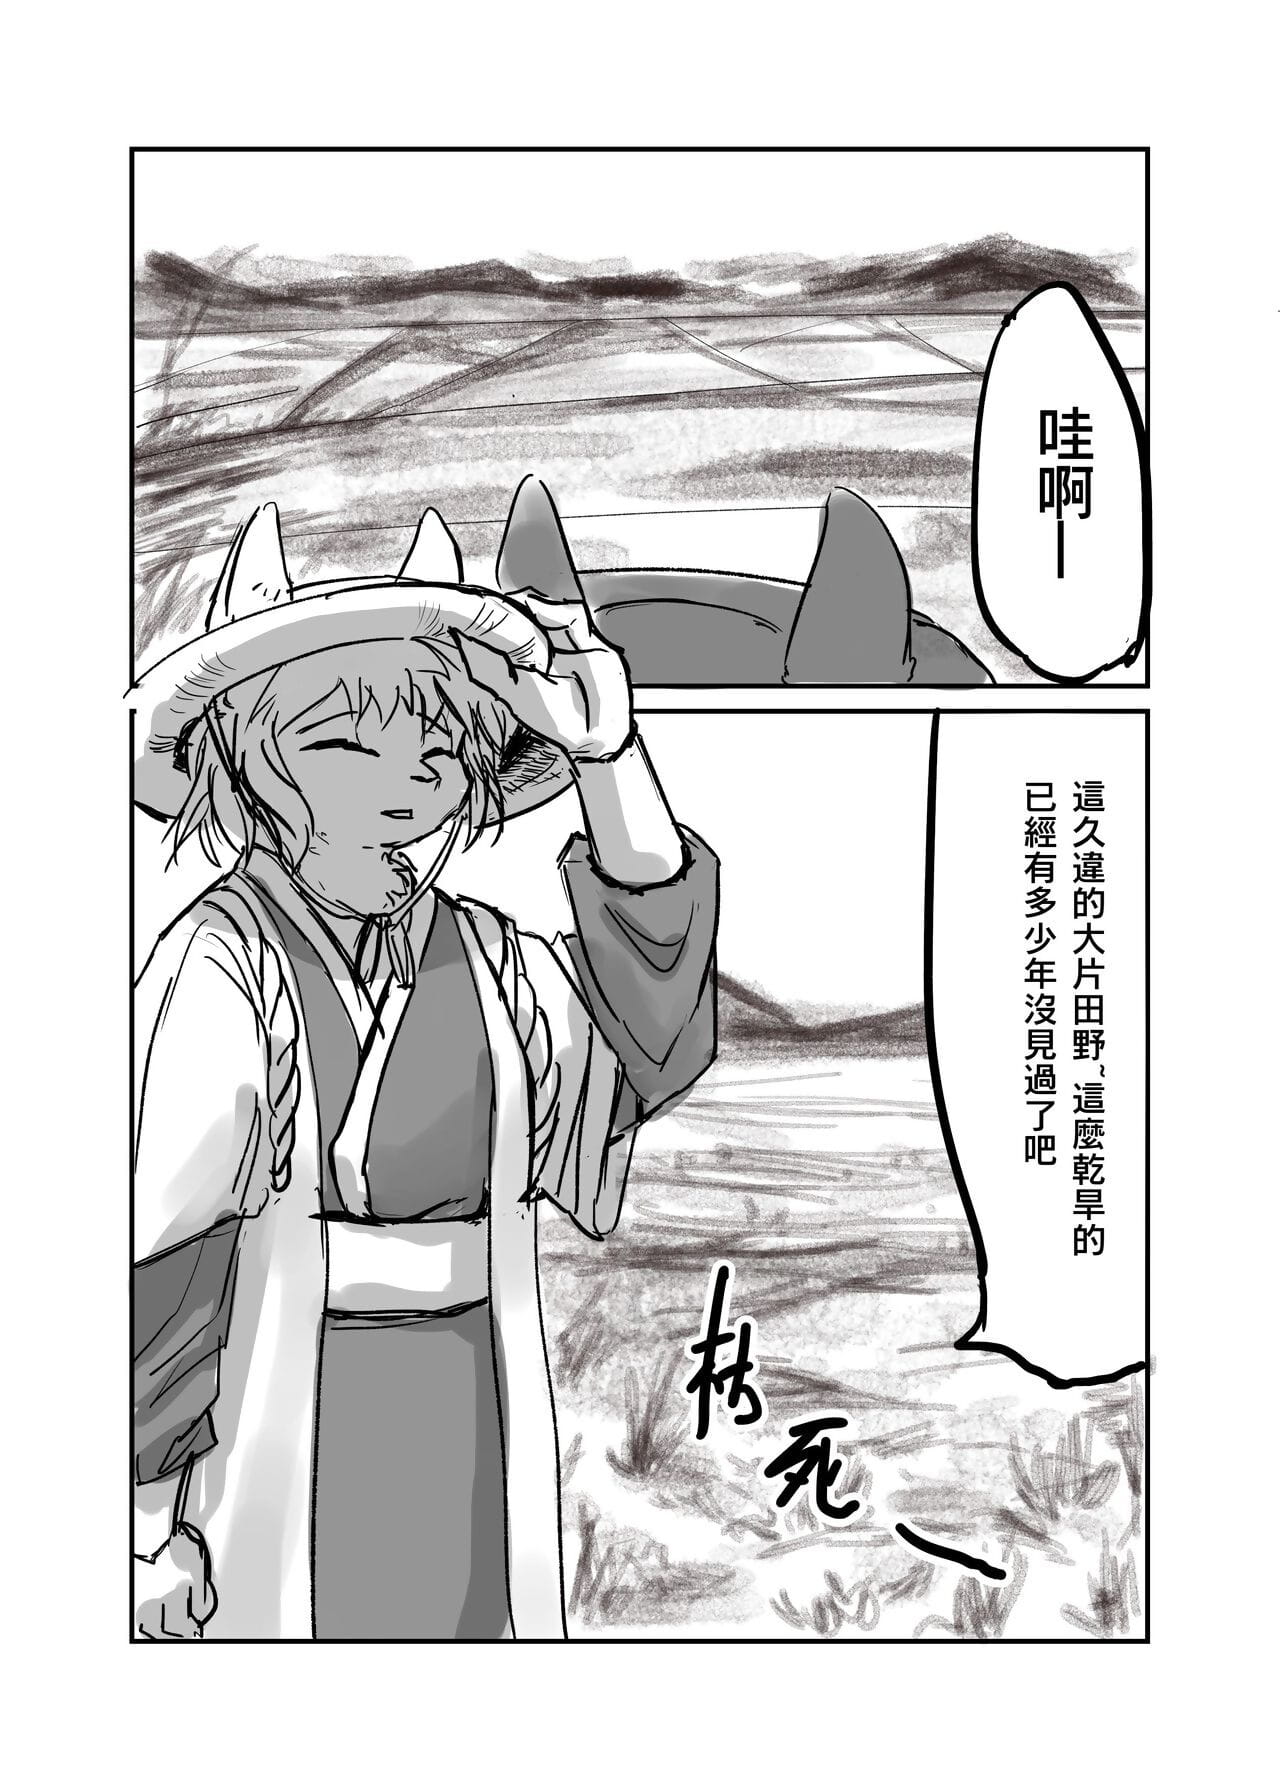 （the bezoeker 他乡之人 by：鬼流 page 1